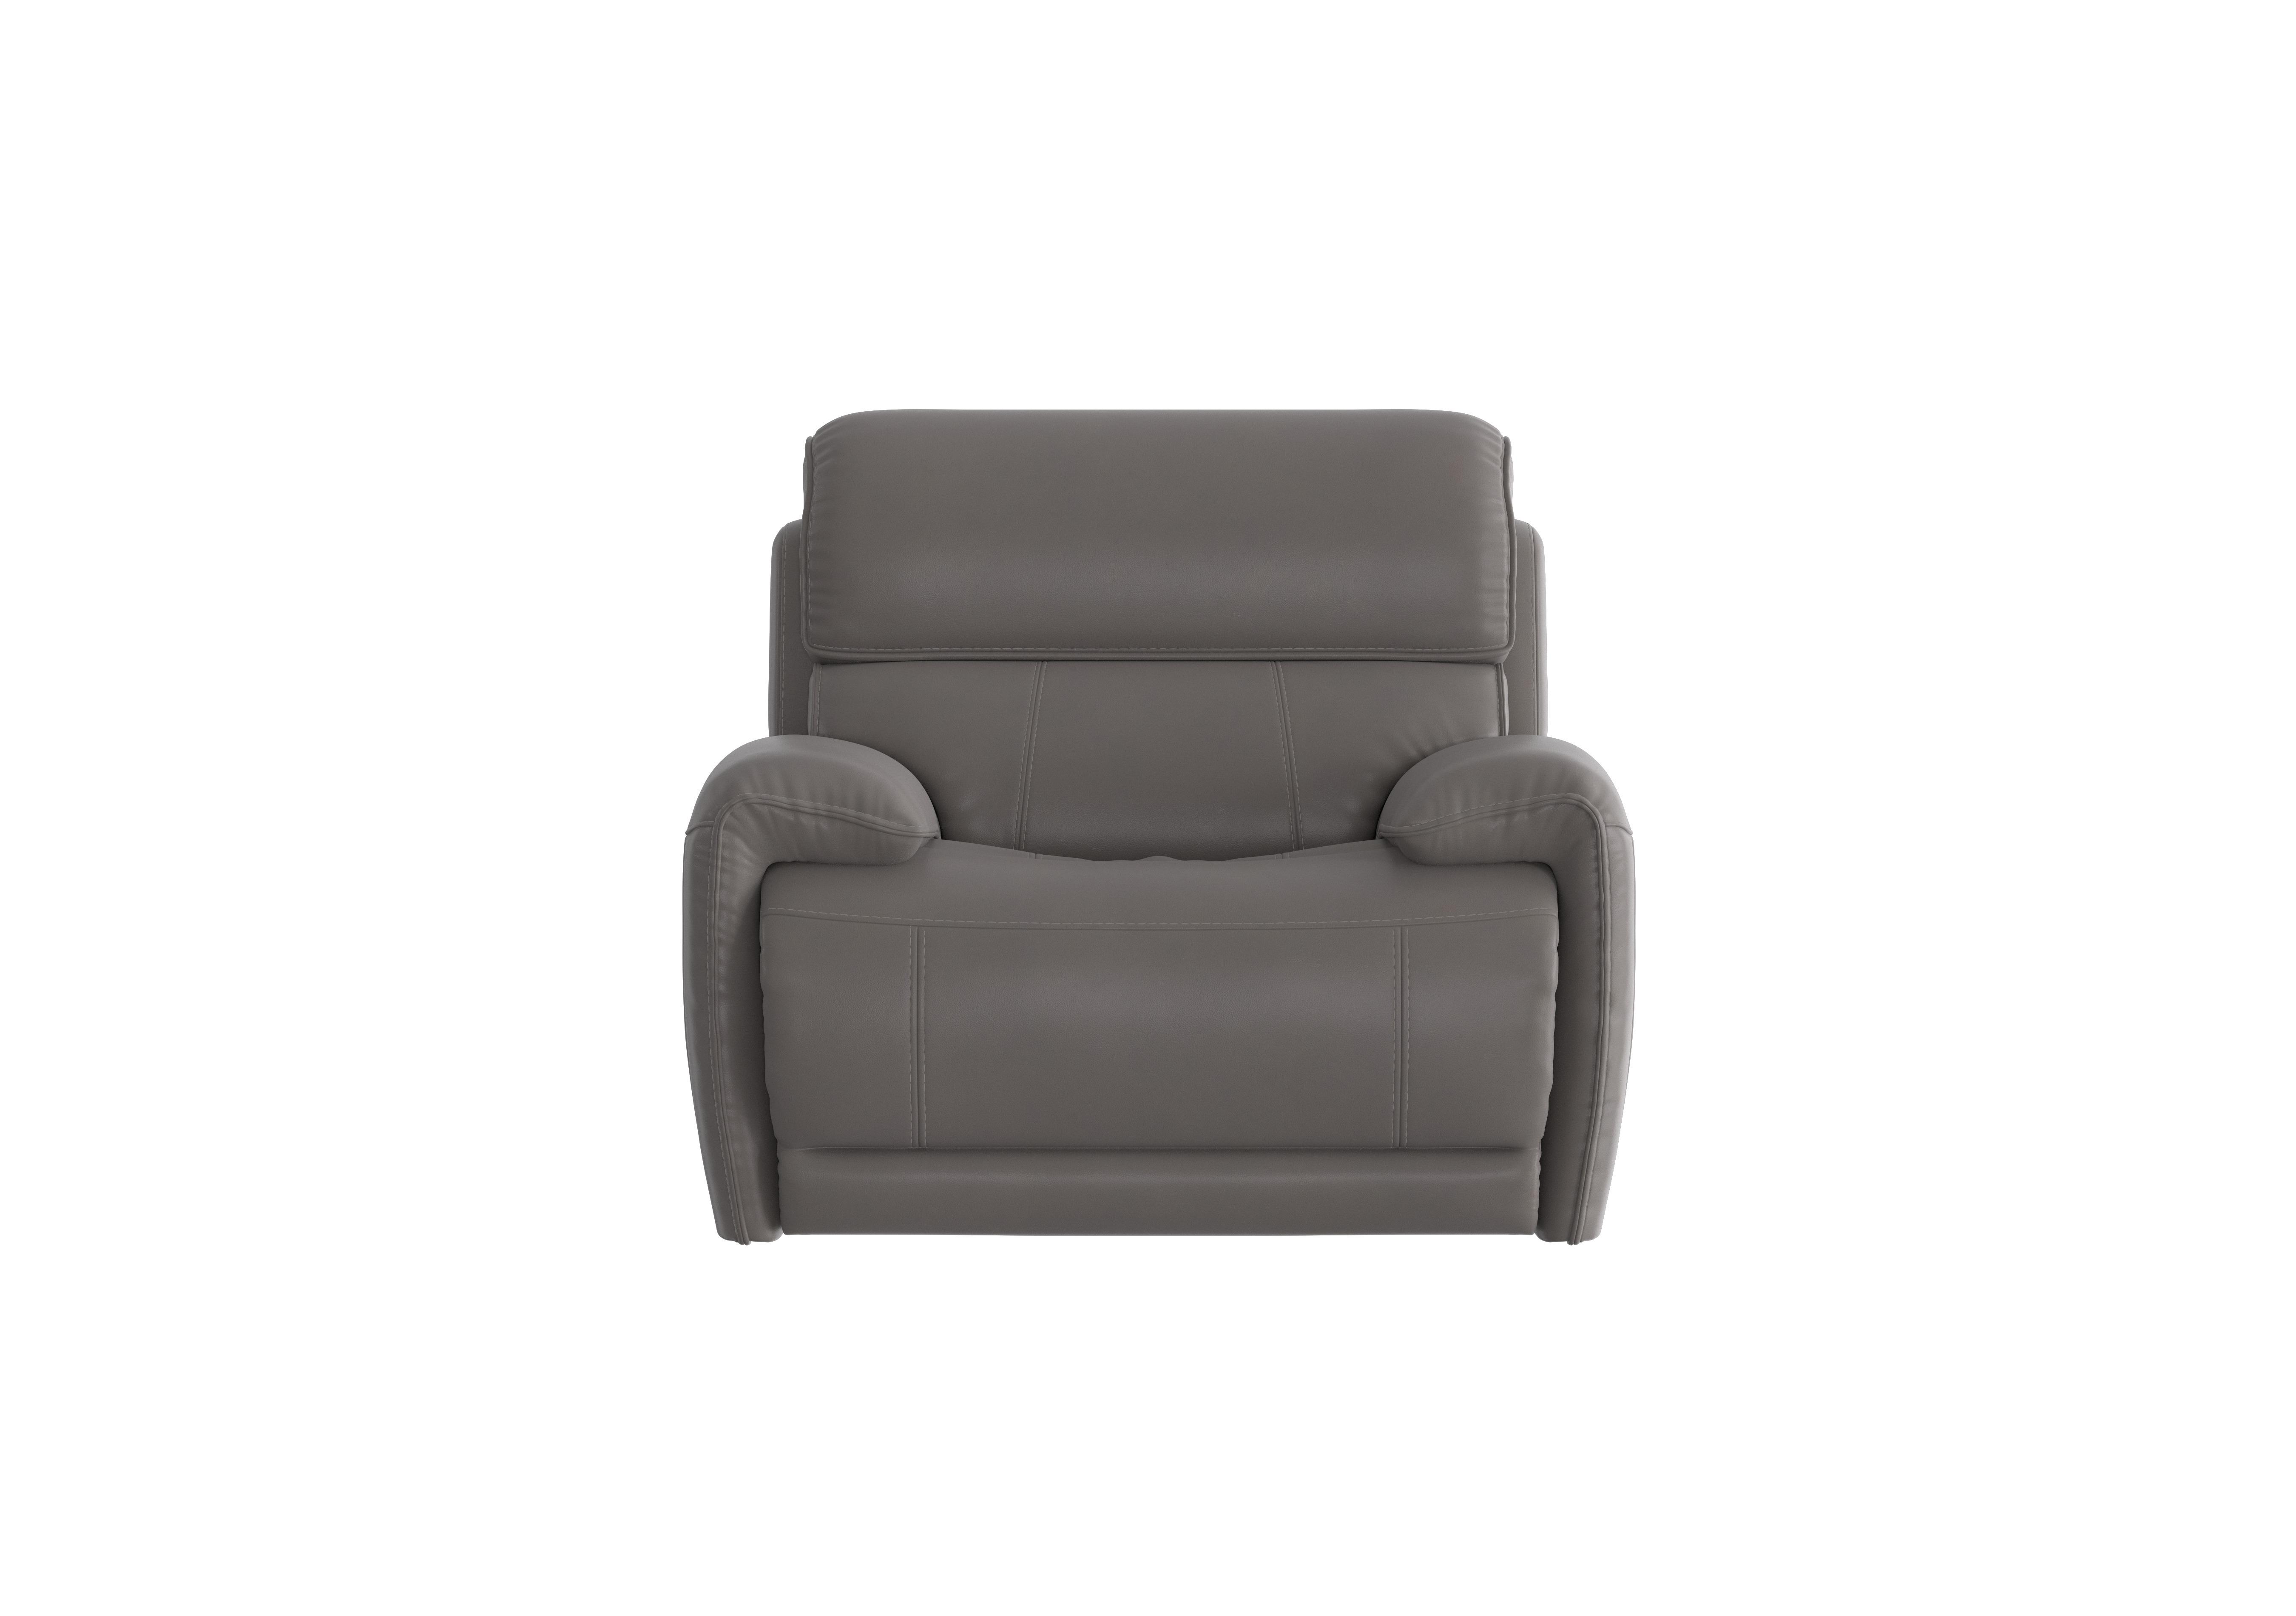 Link Leather Power Recliner Armchair with Power Headrest in Bv-042e Elephant on Furniture Village